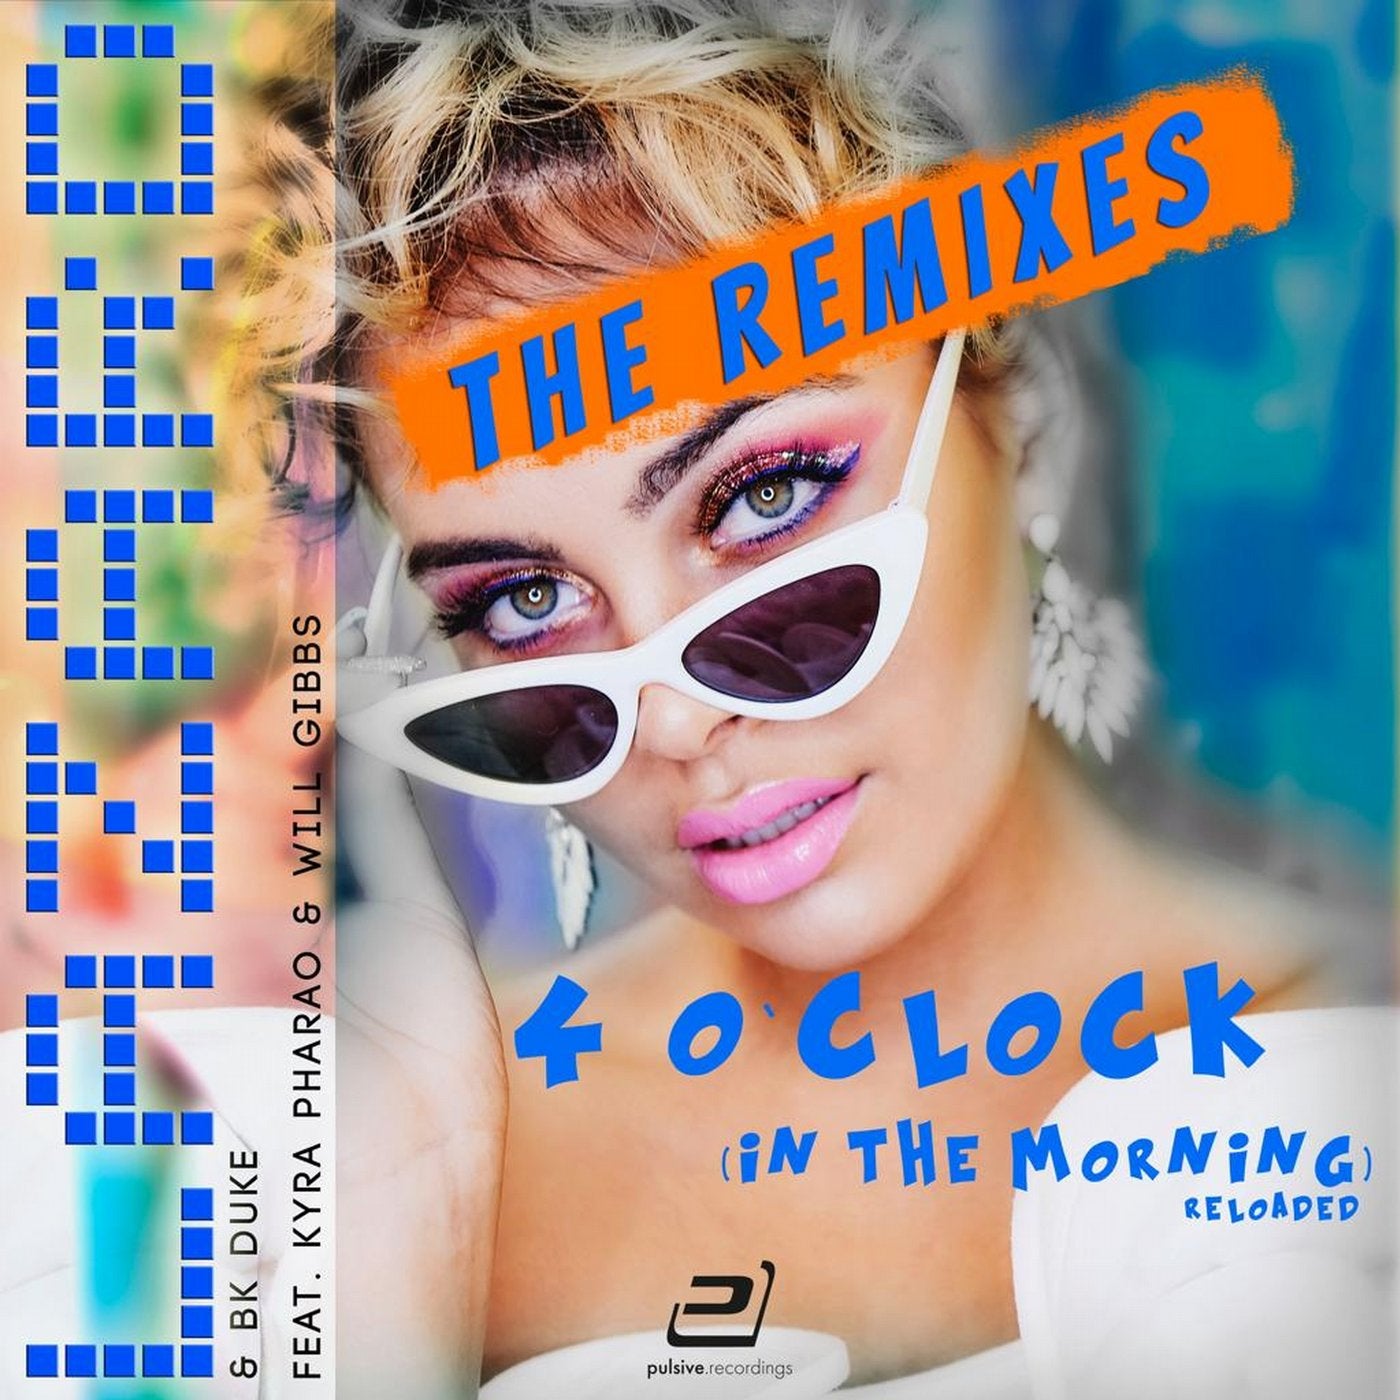 4 o'Clock (In the Morning) [The Remixes]